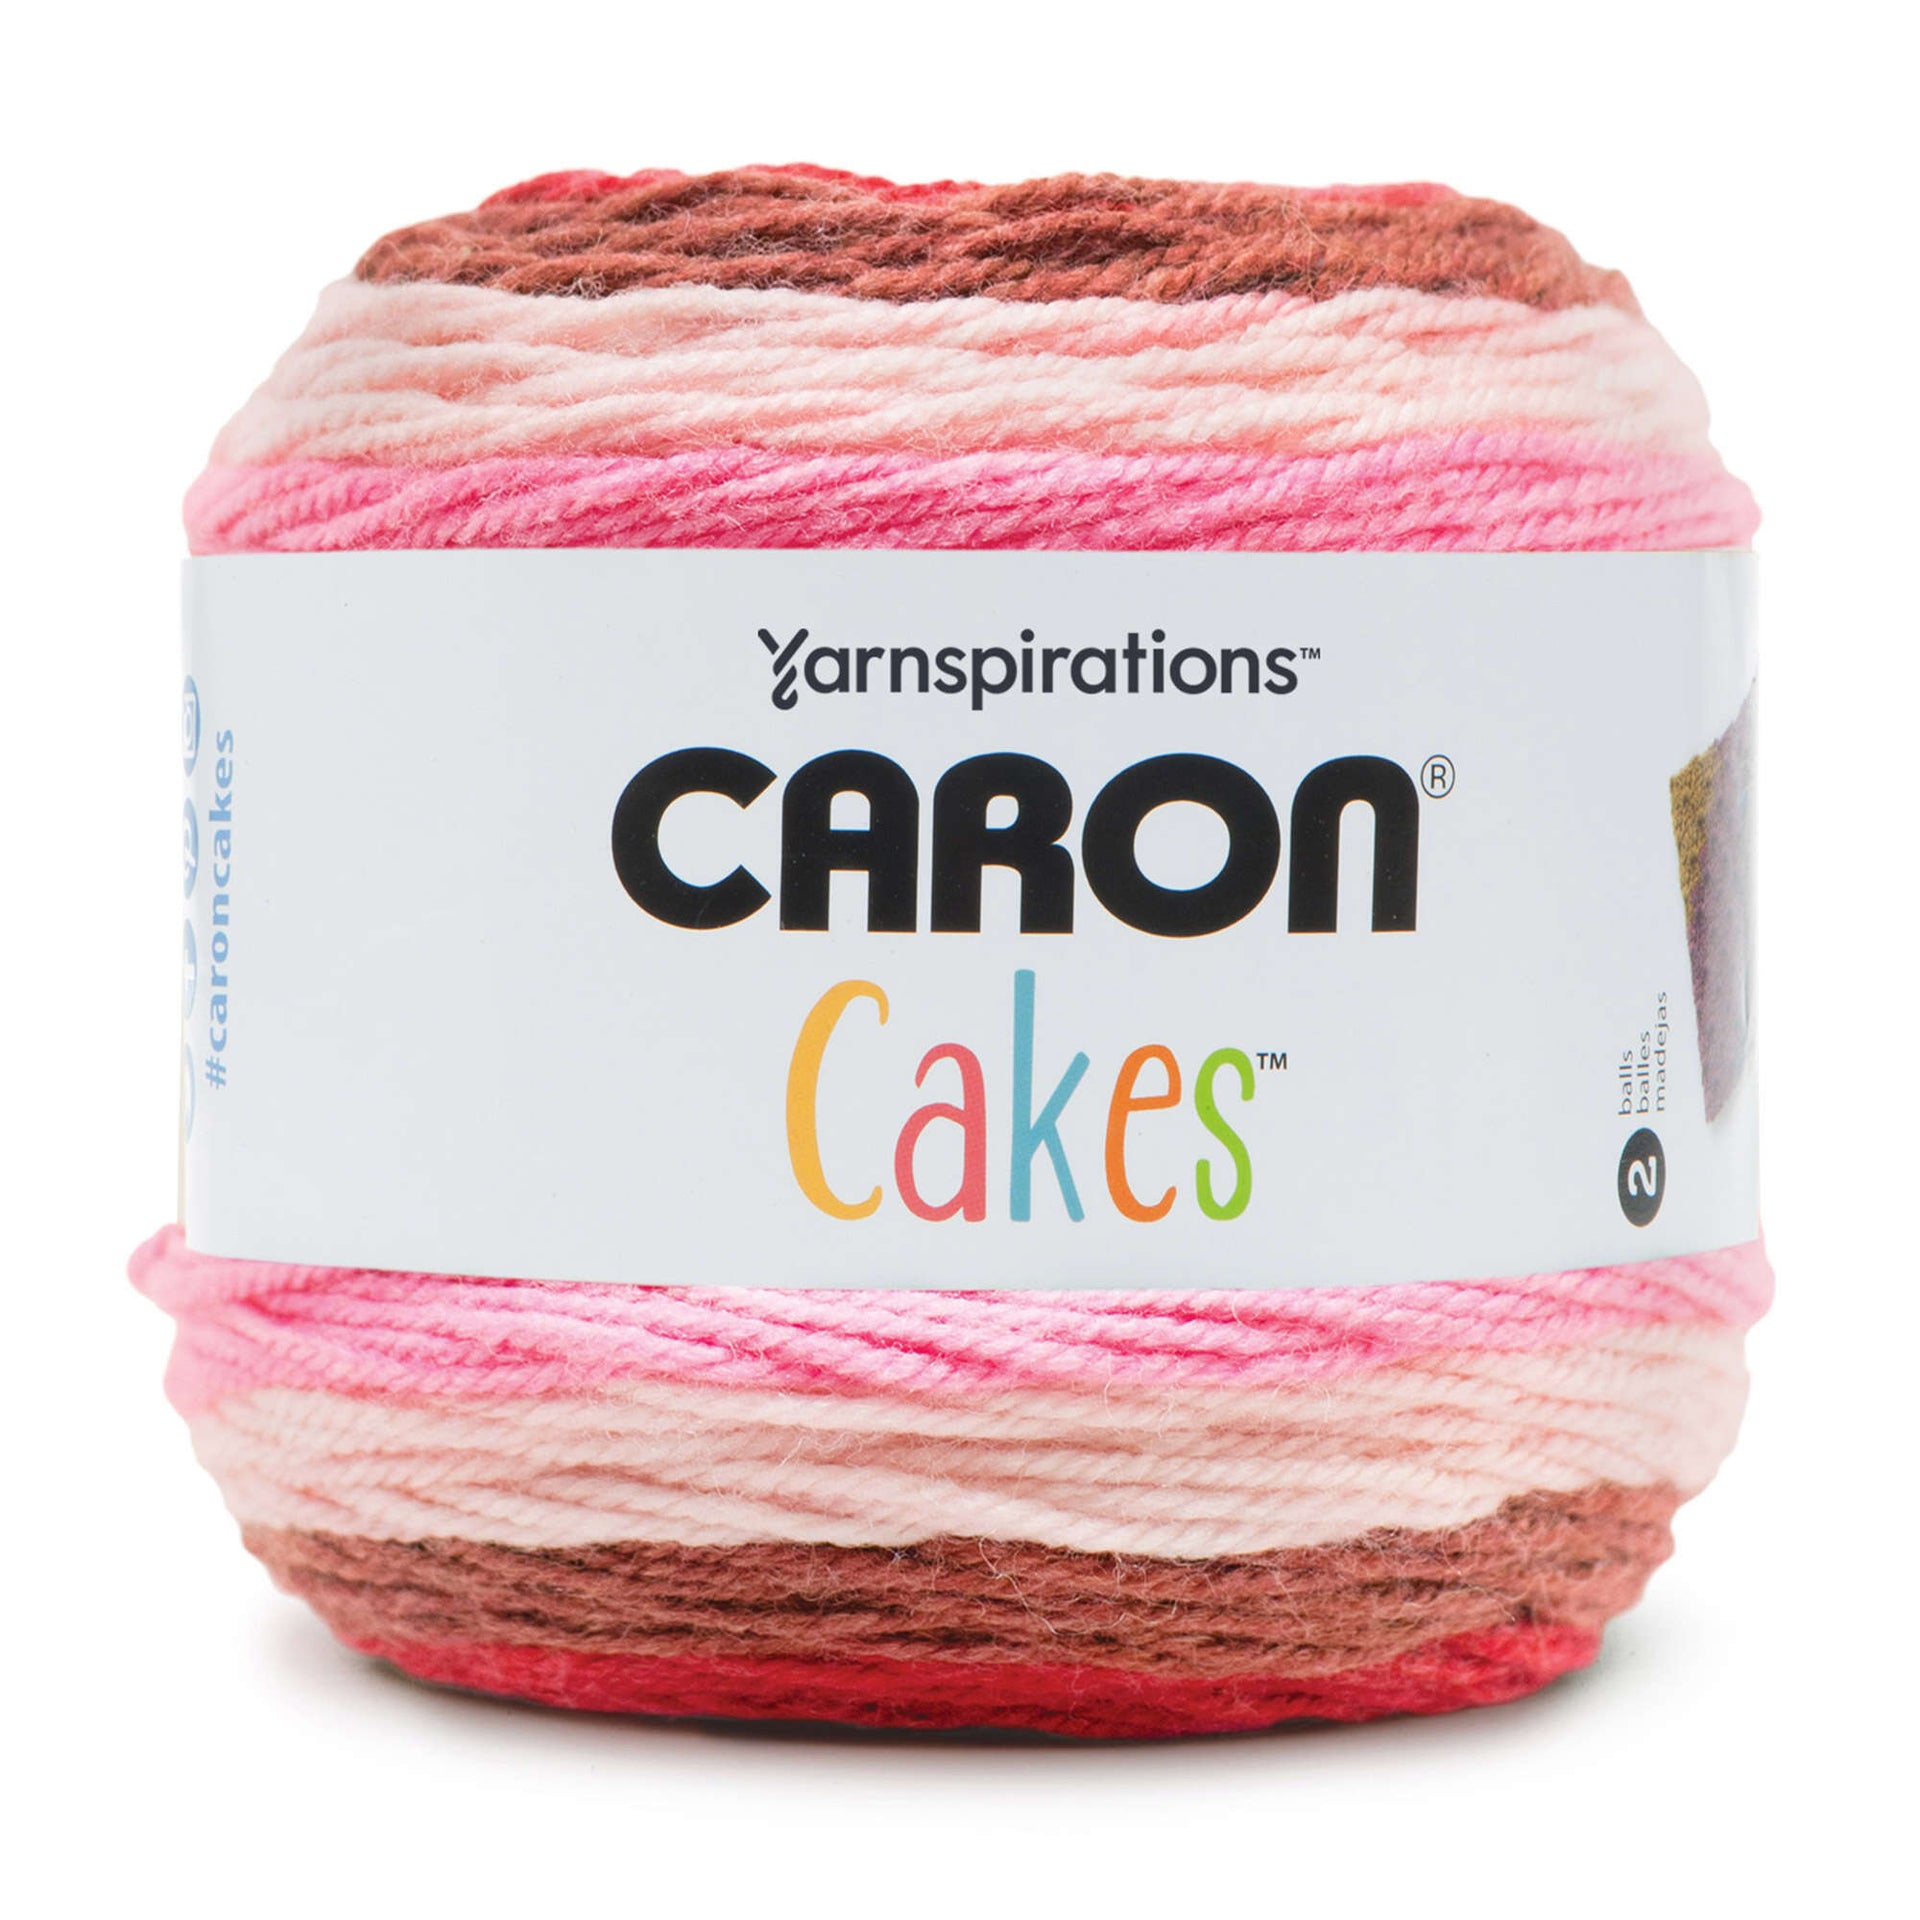 18 Pack: Caron Cakes Yarn, Size: 7.1, Other